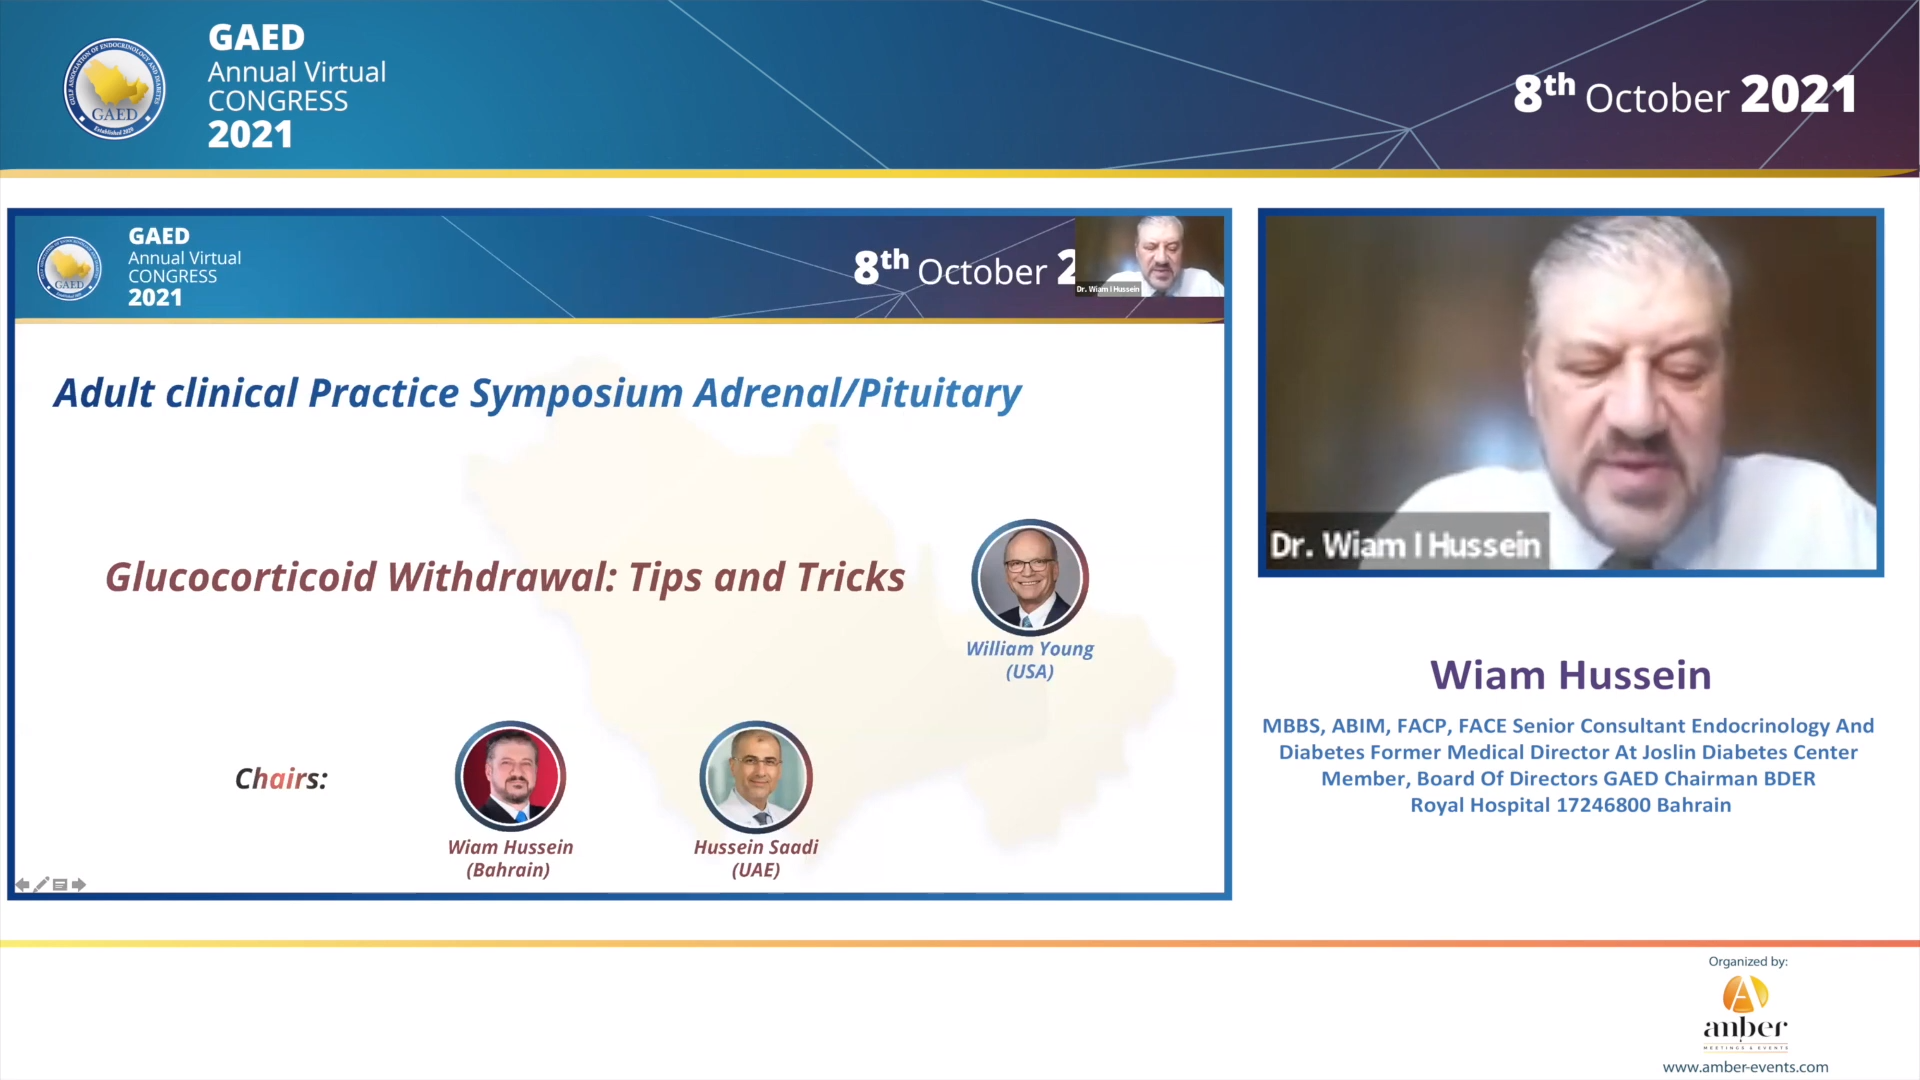 8.10.21 - Day 2, Adult - clinical Practice Symposium Adrenal or Pituitary